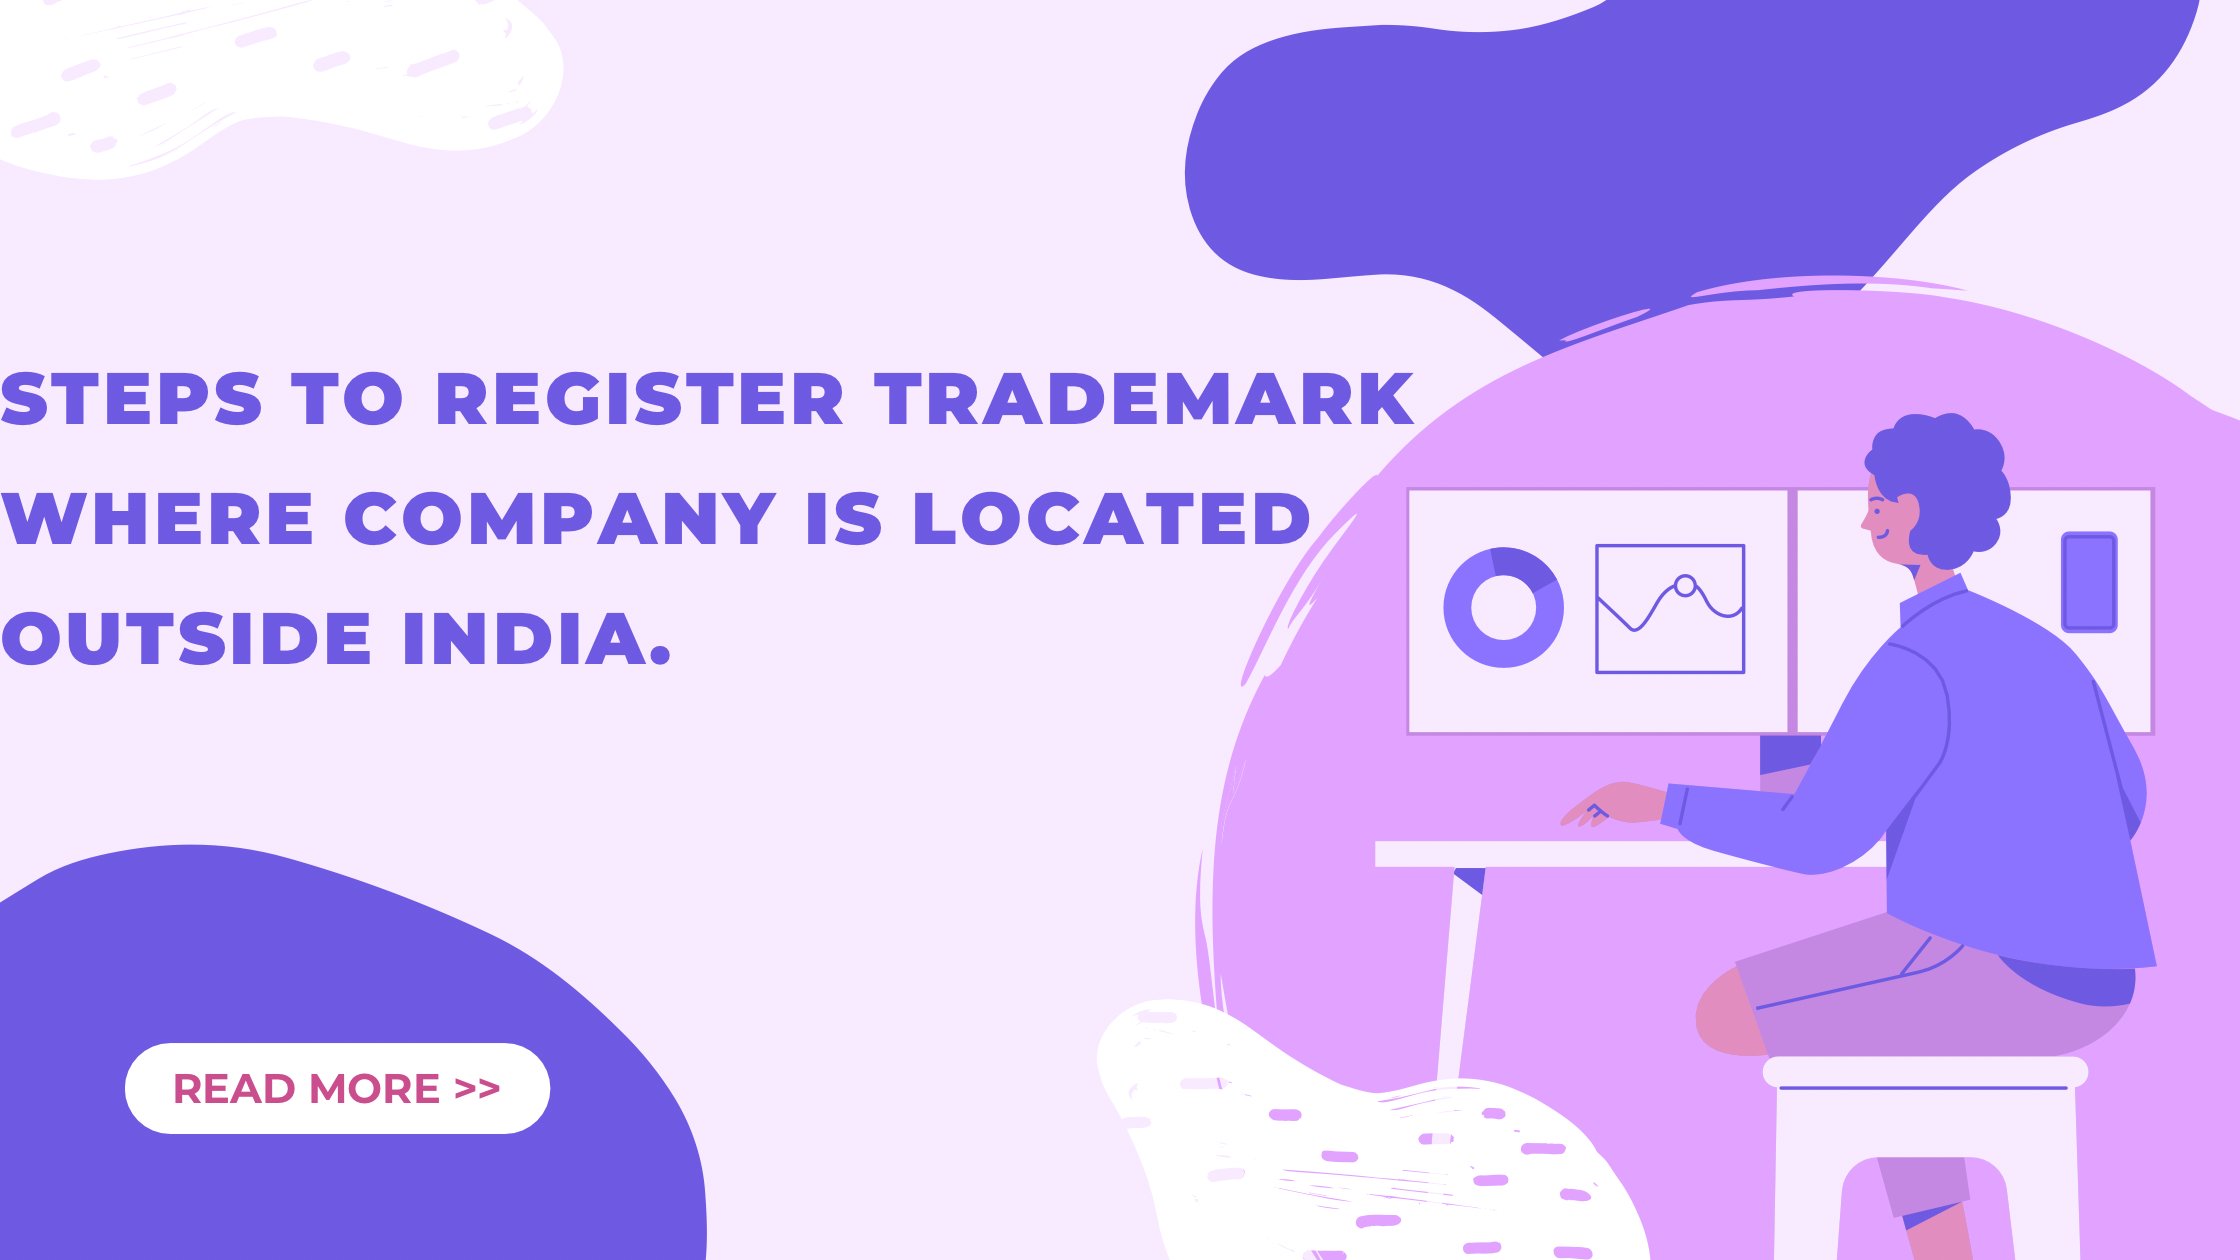 Steps to Register Trademark Where Company is located outside India.